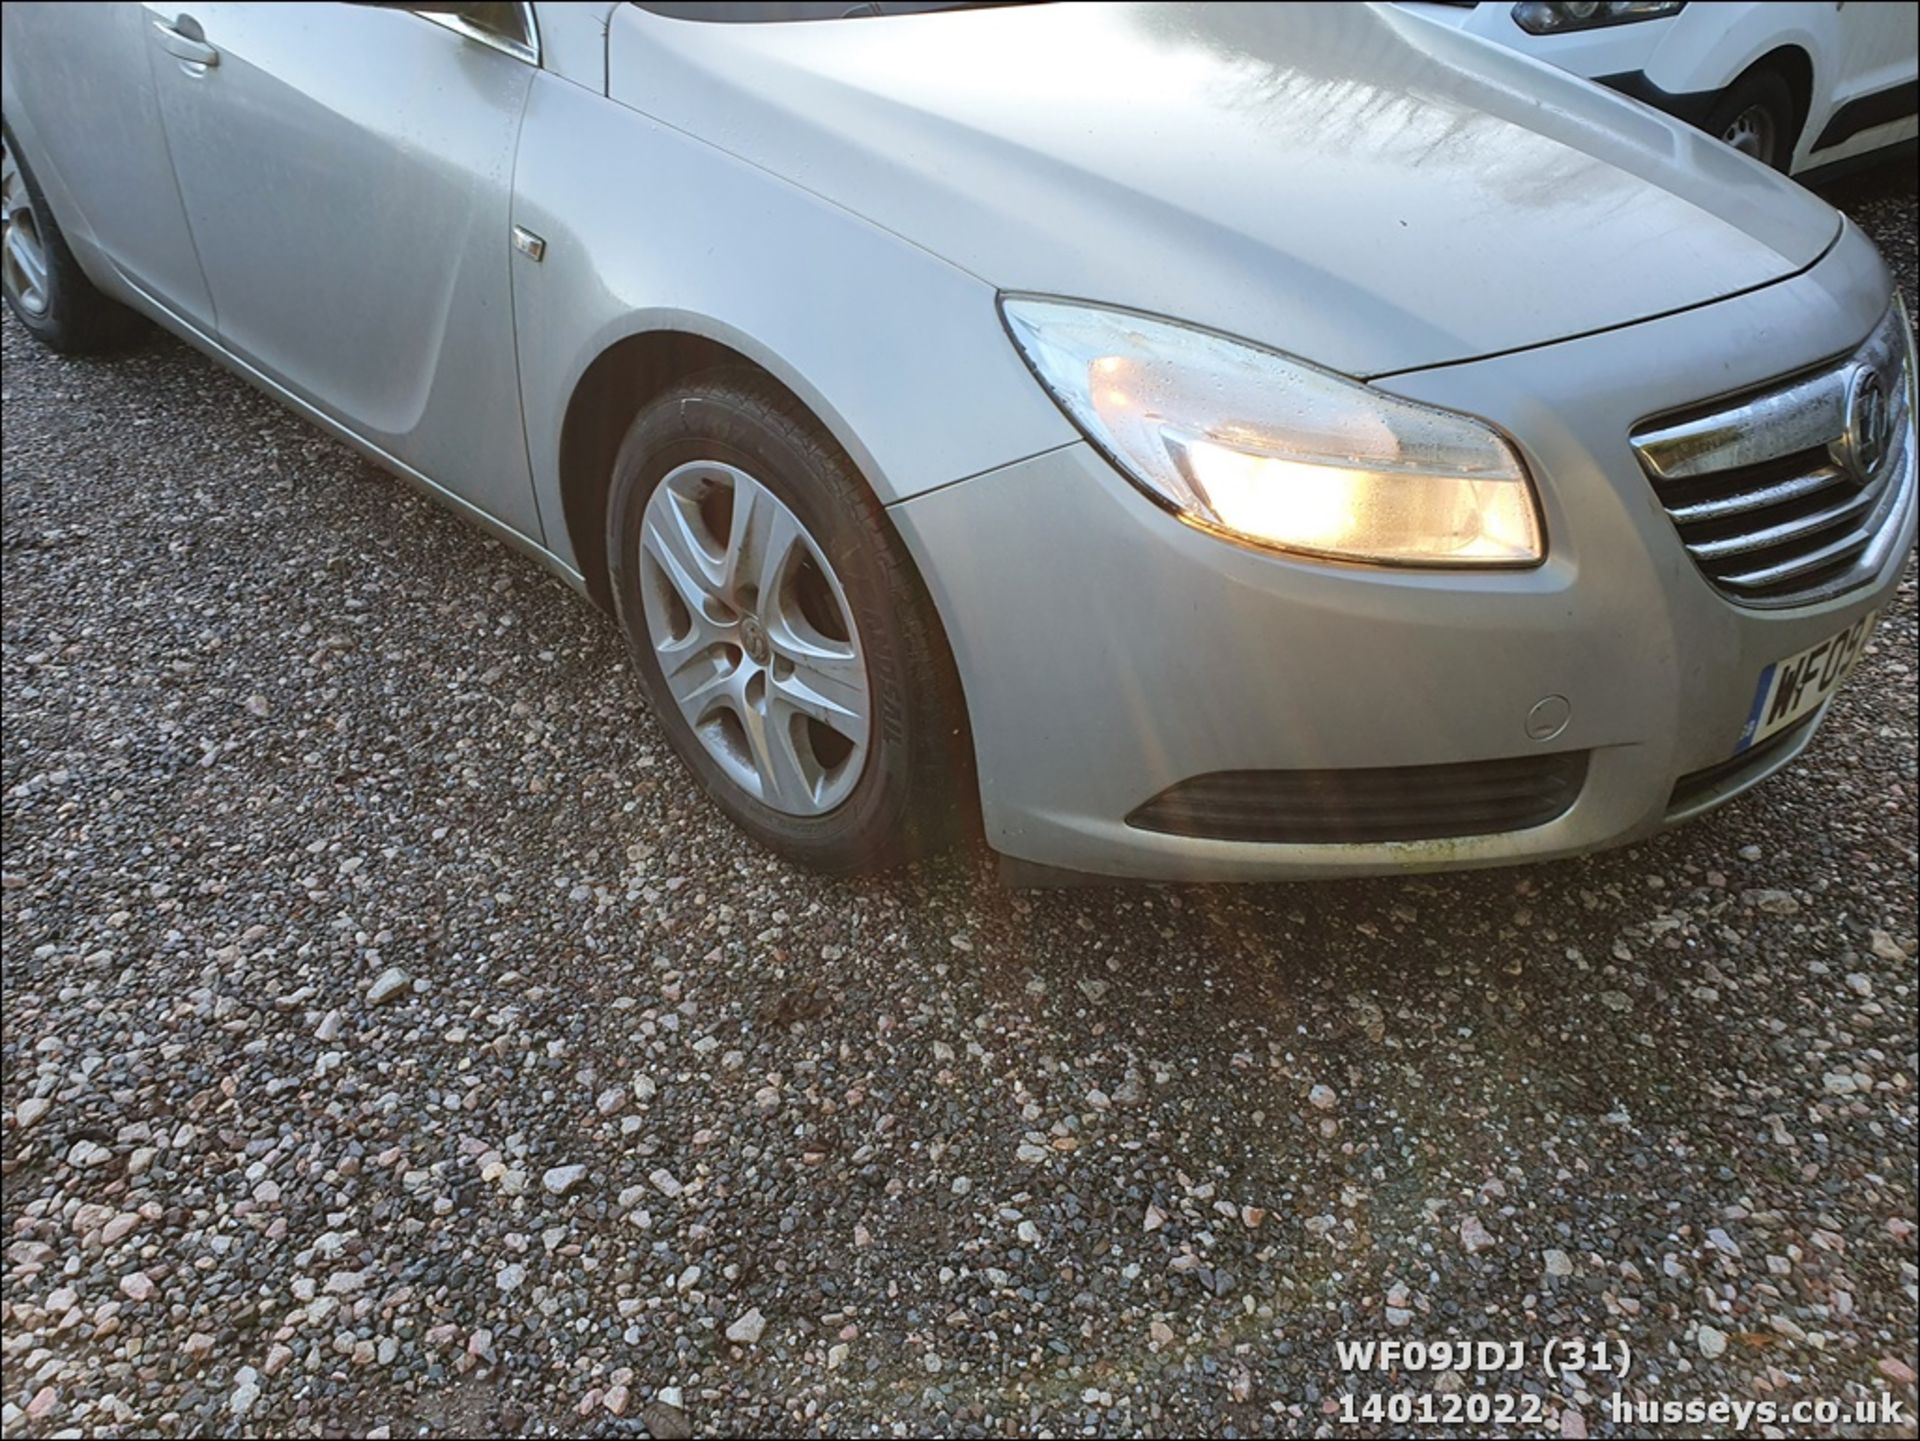 09/09 VAUXHALL INSIGNIA EXCLUSIV NAV - 1796cc 5dr Hatchback (Silver, 123k) - Image 31 of 38